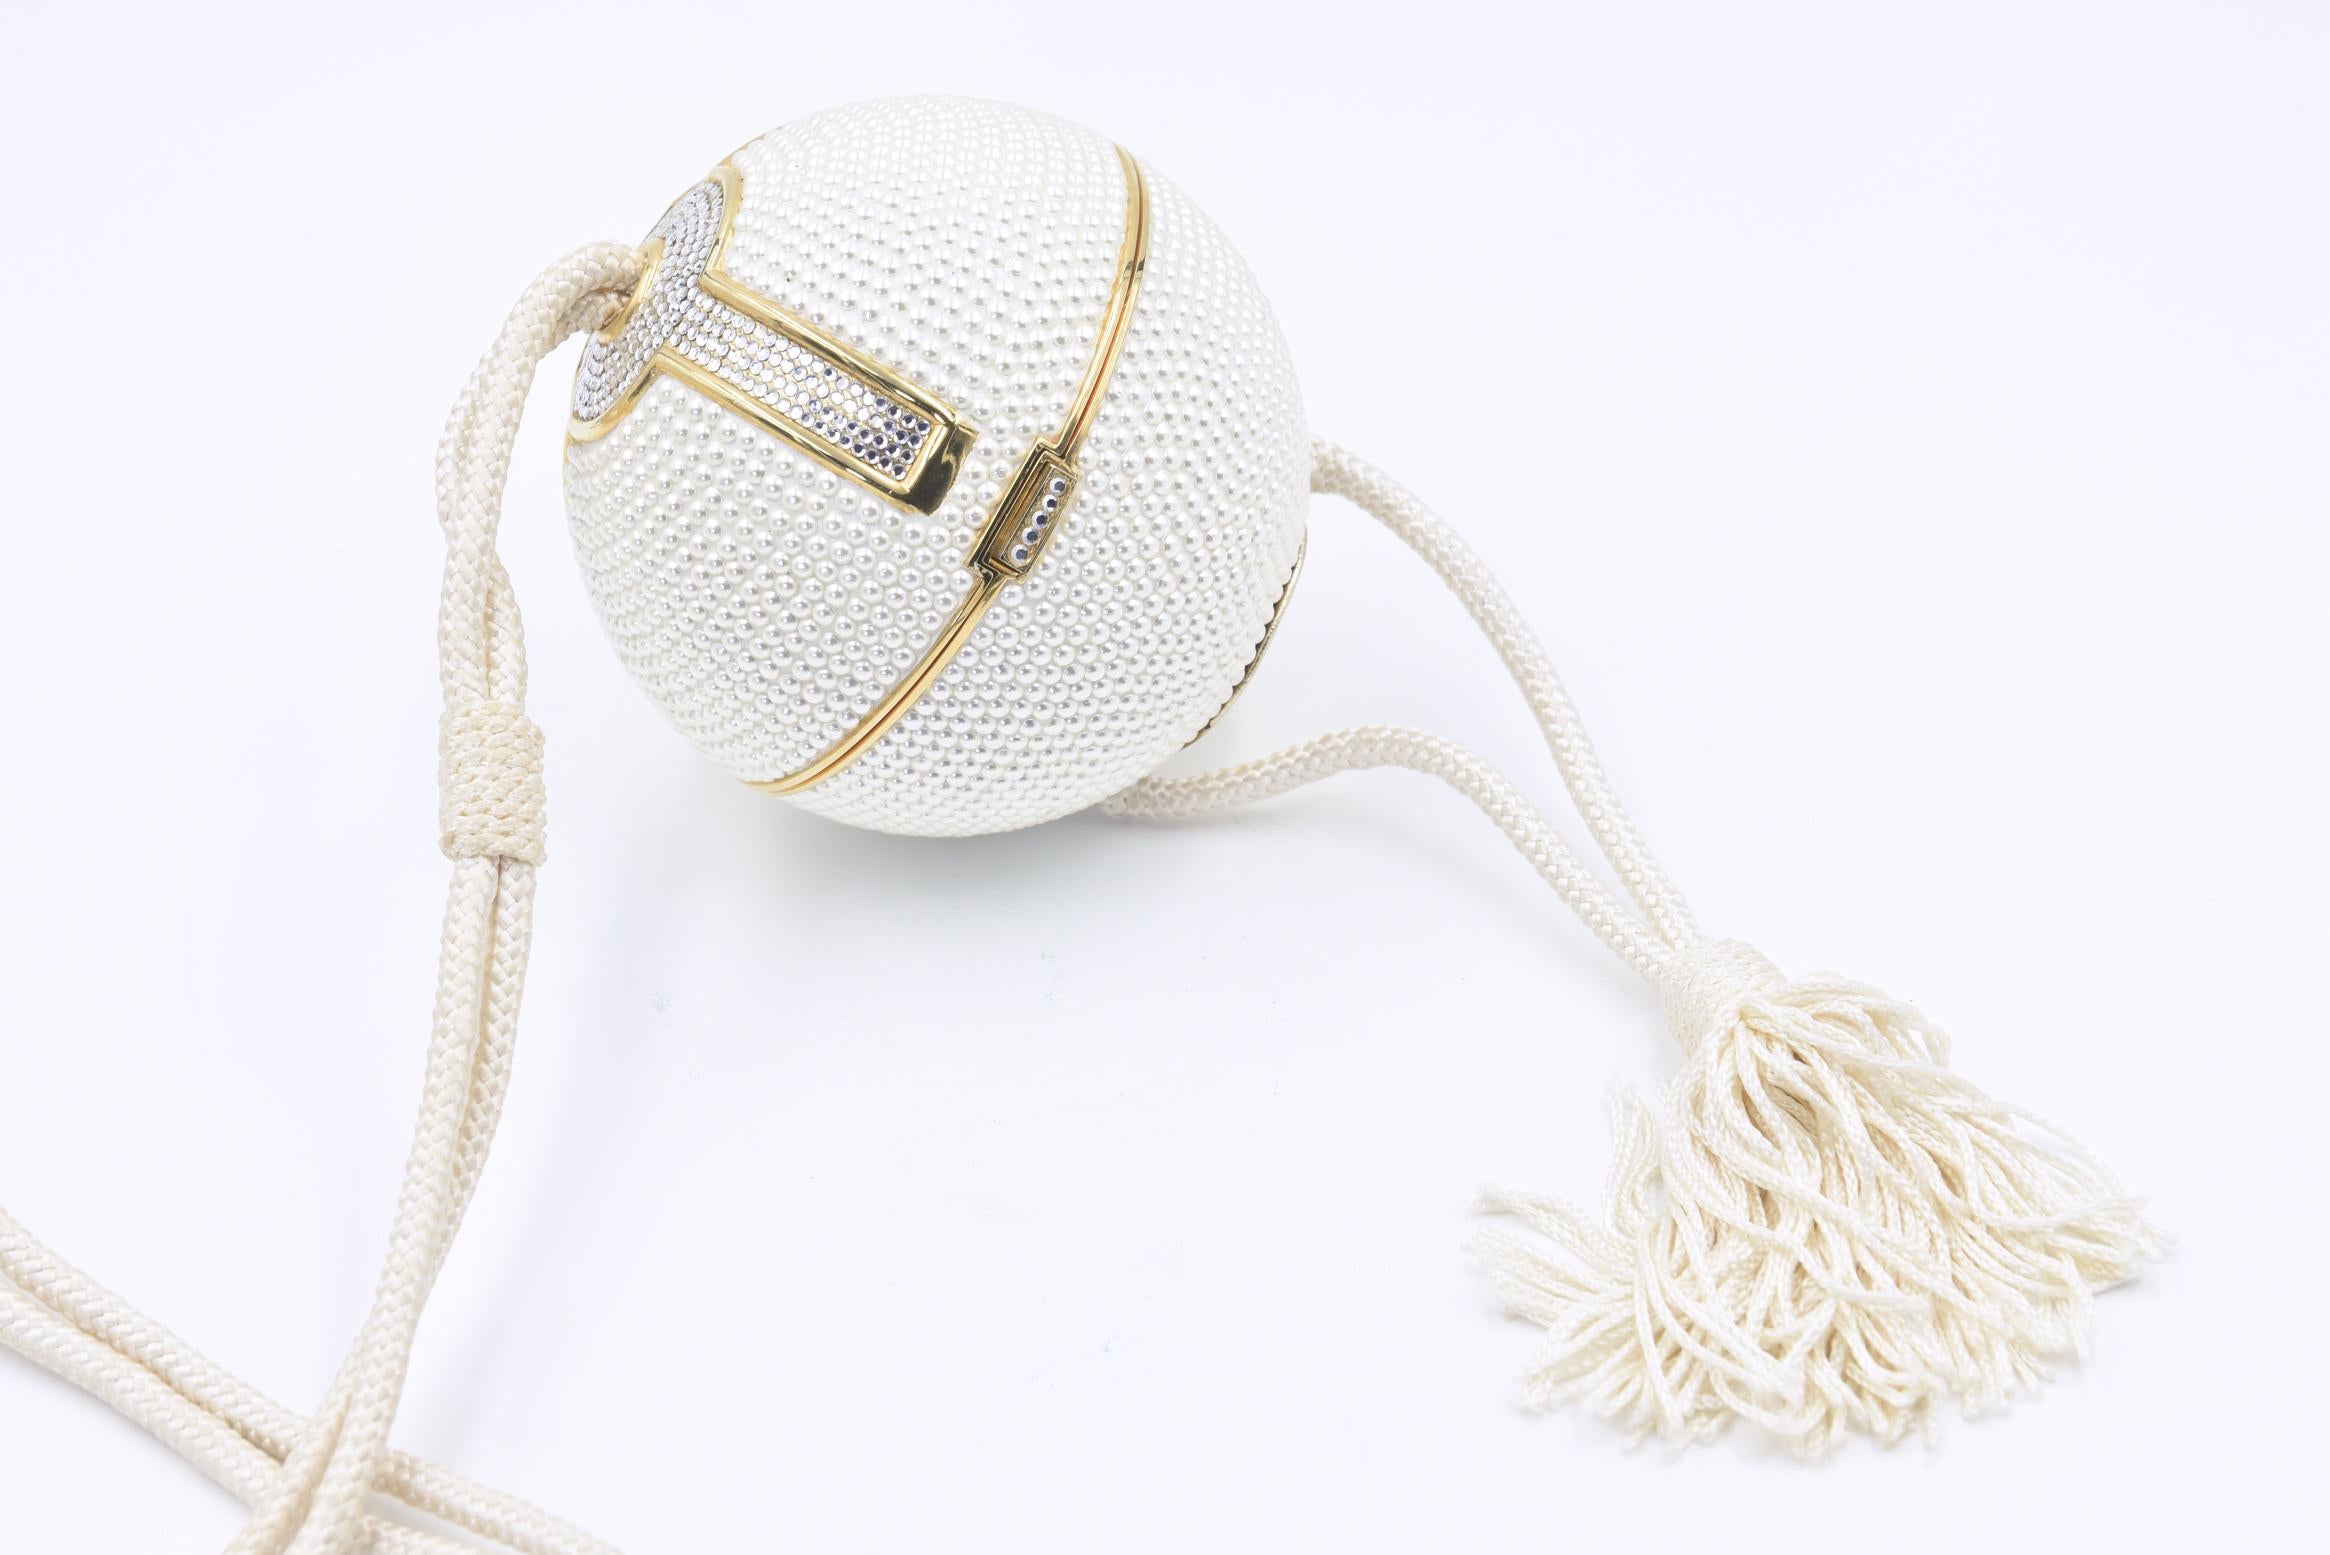 RARE Judith Leiber white crystal sphere minaudières shoulder bag in excellent vintage condition. White Swarovski crystal exterior trimmed with gold edges and clear crystals along top and side design. Corded Silk shoulder strap with tassel detail.